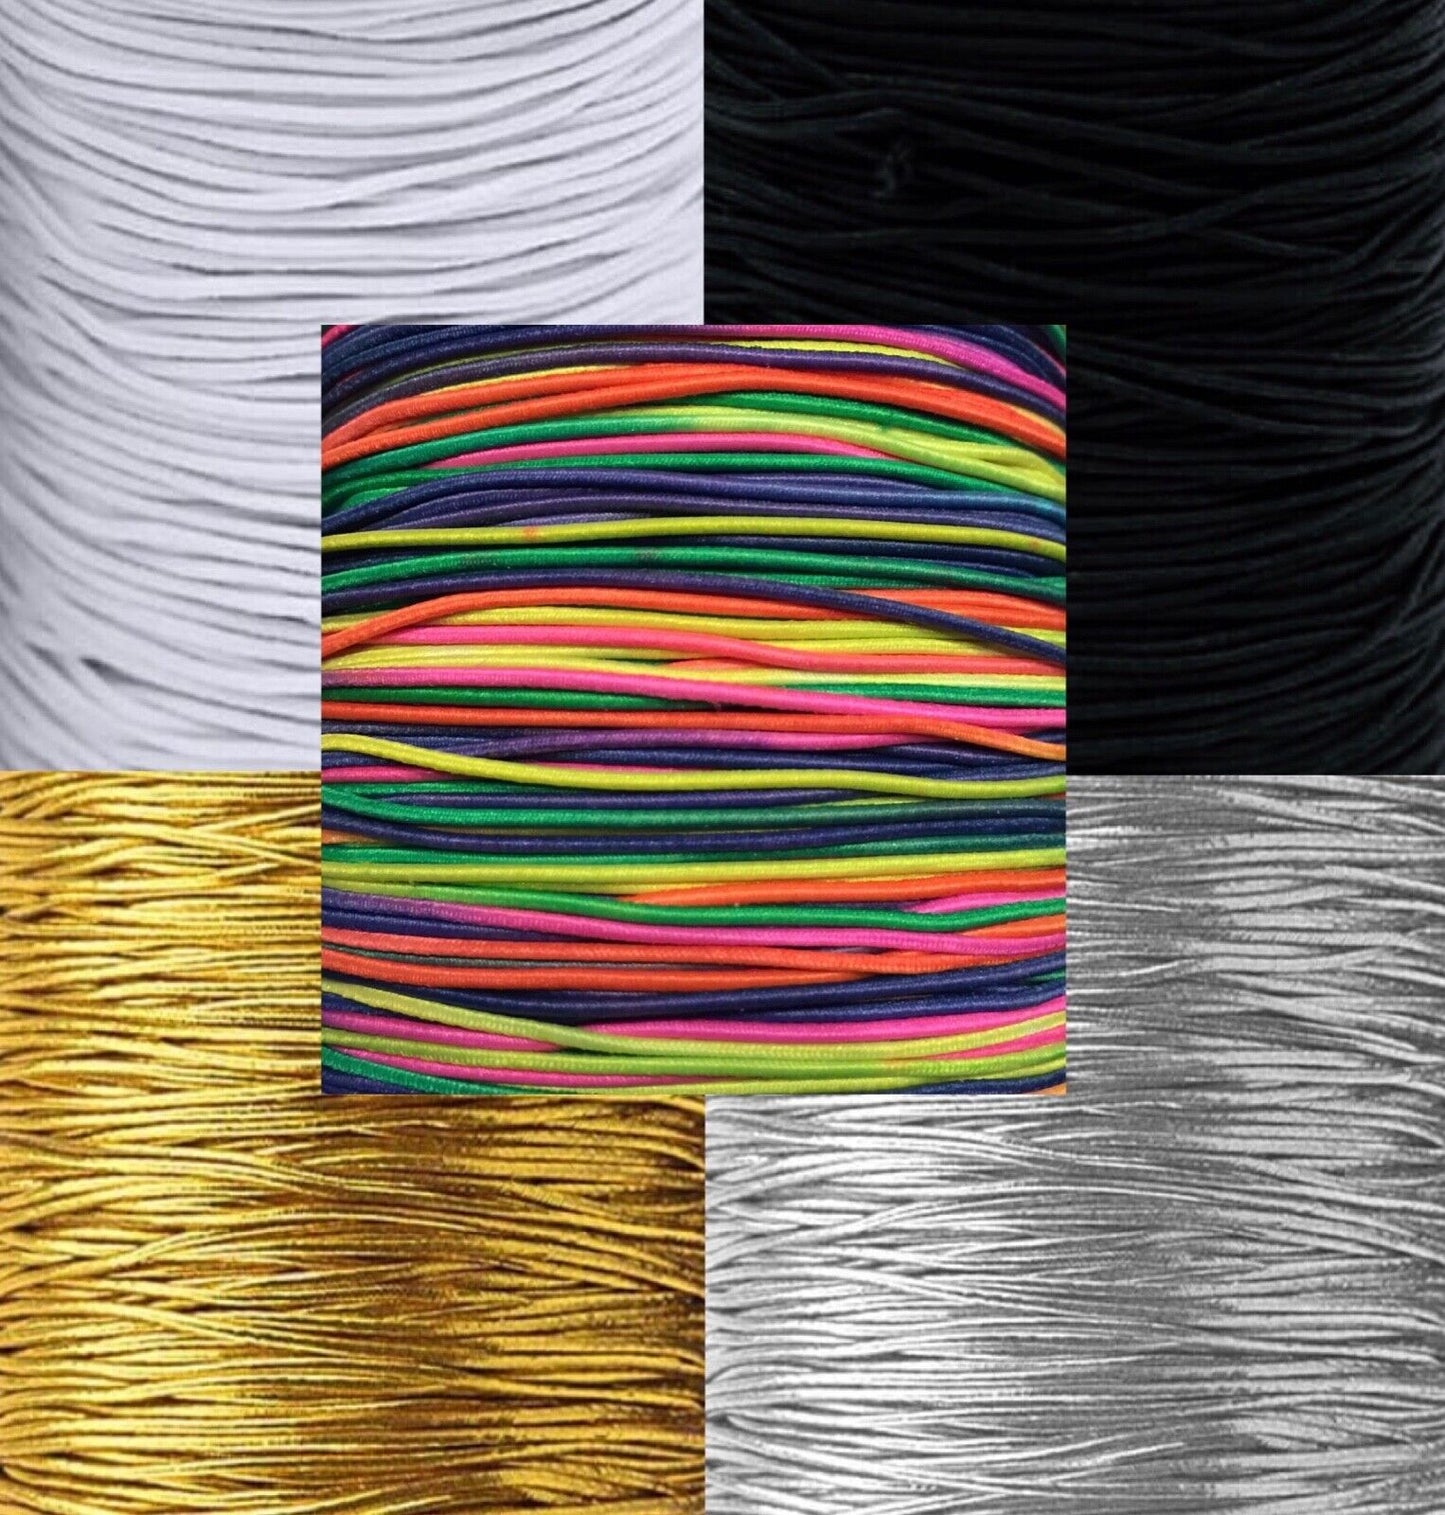 10x Yards 1mm Elastic Beading Crafting Cord - Pick your colour